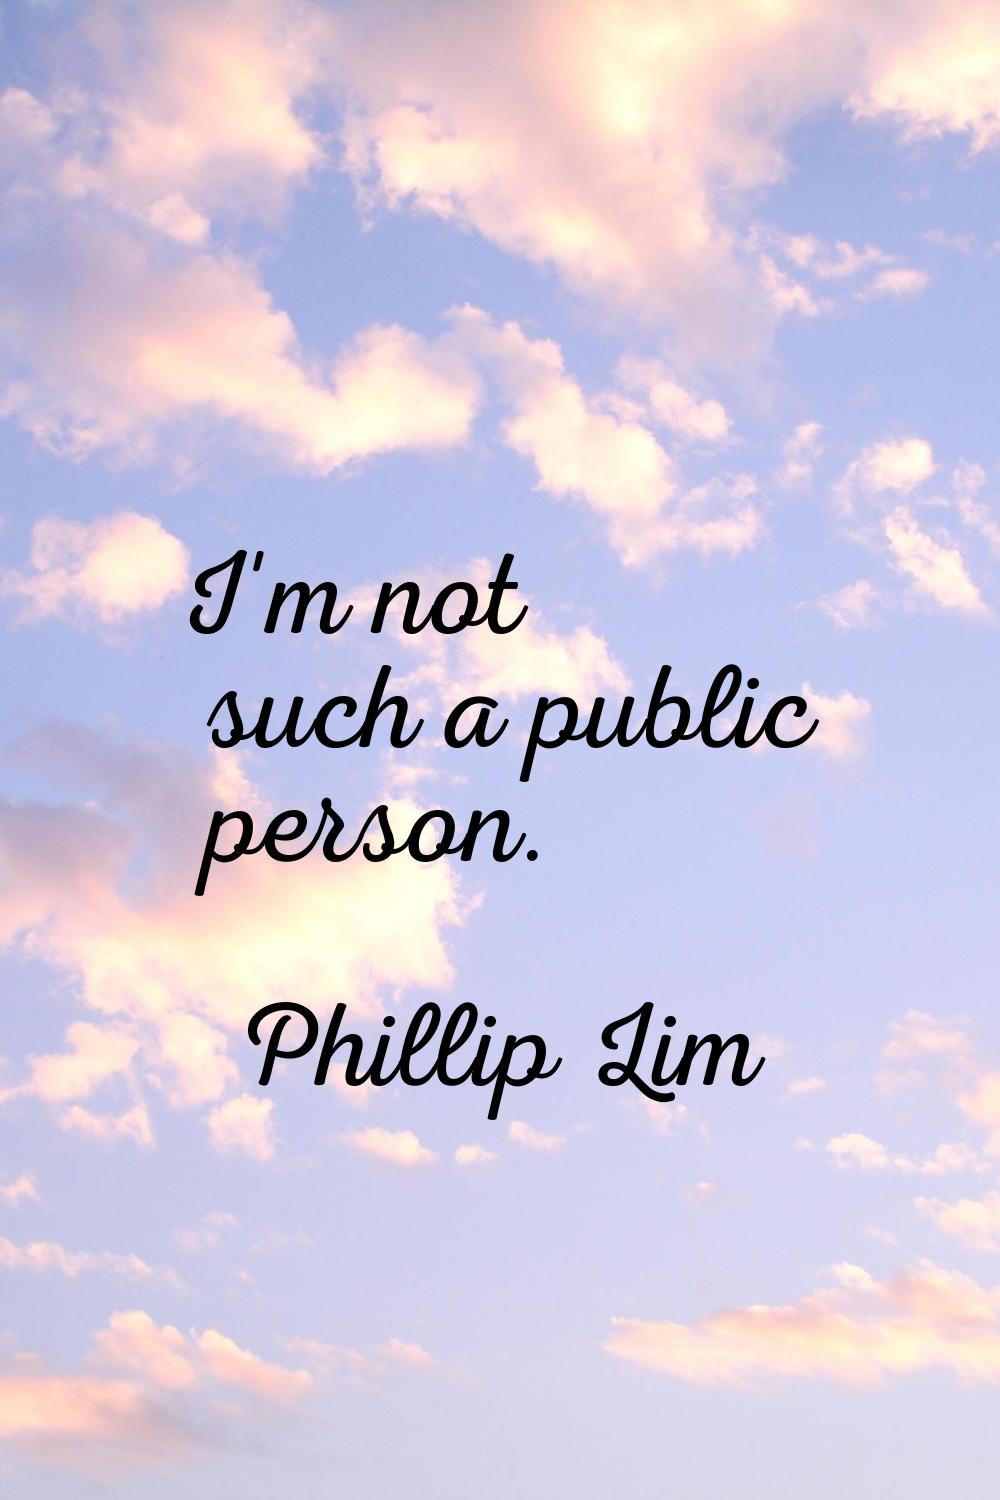 I'm not such a public person.